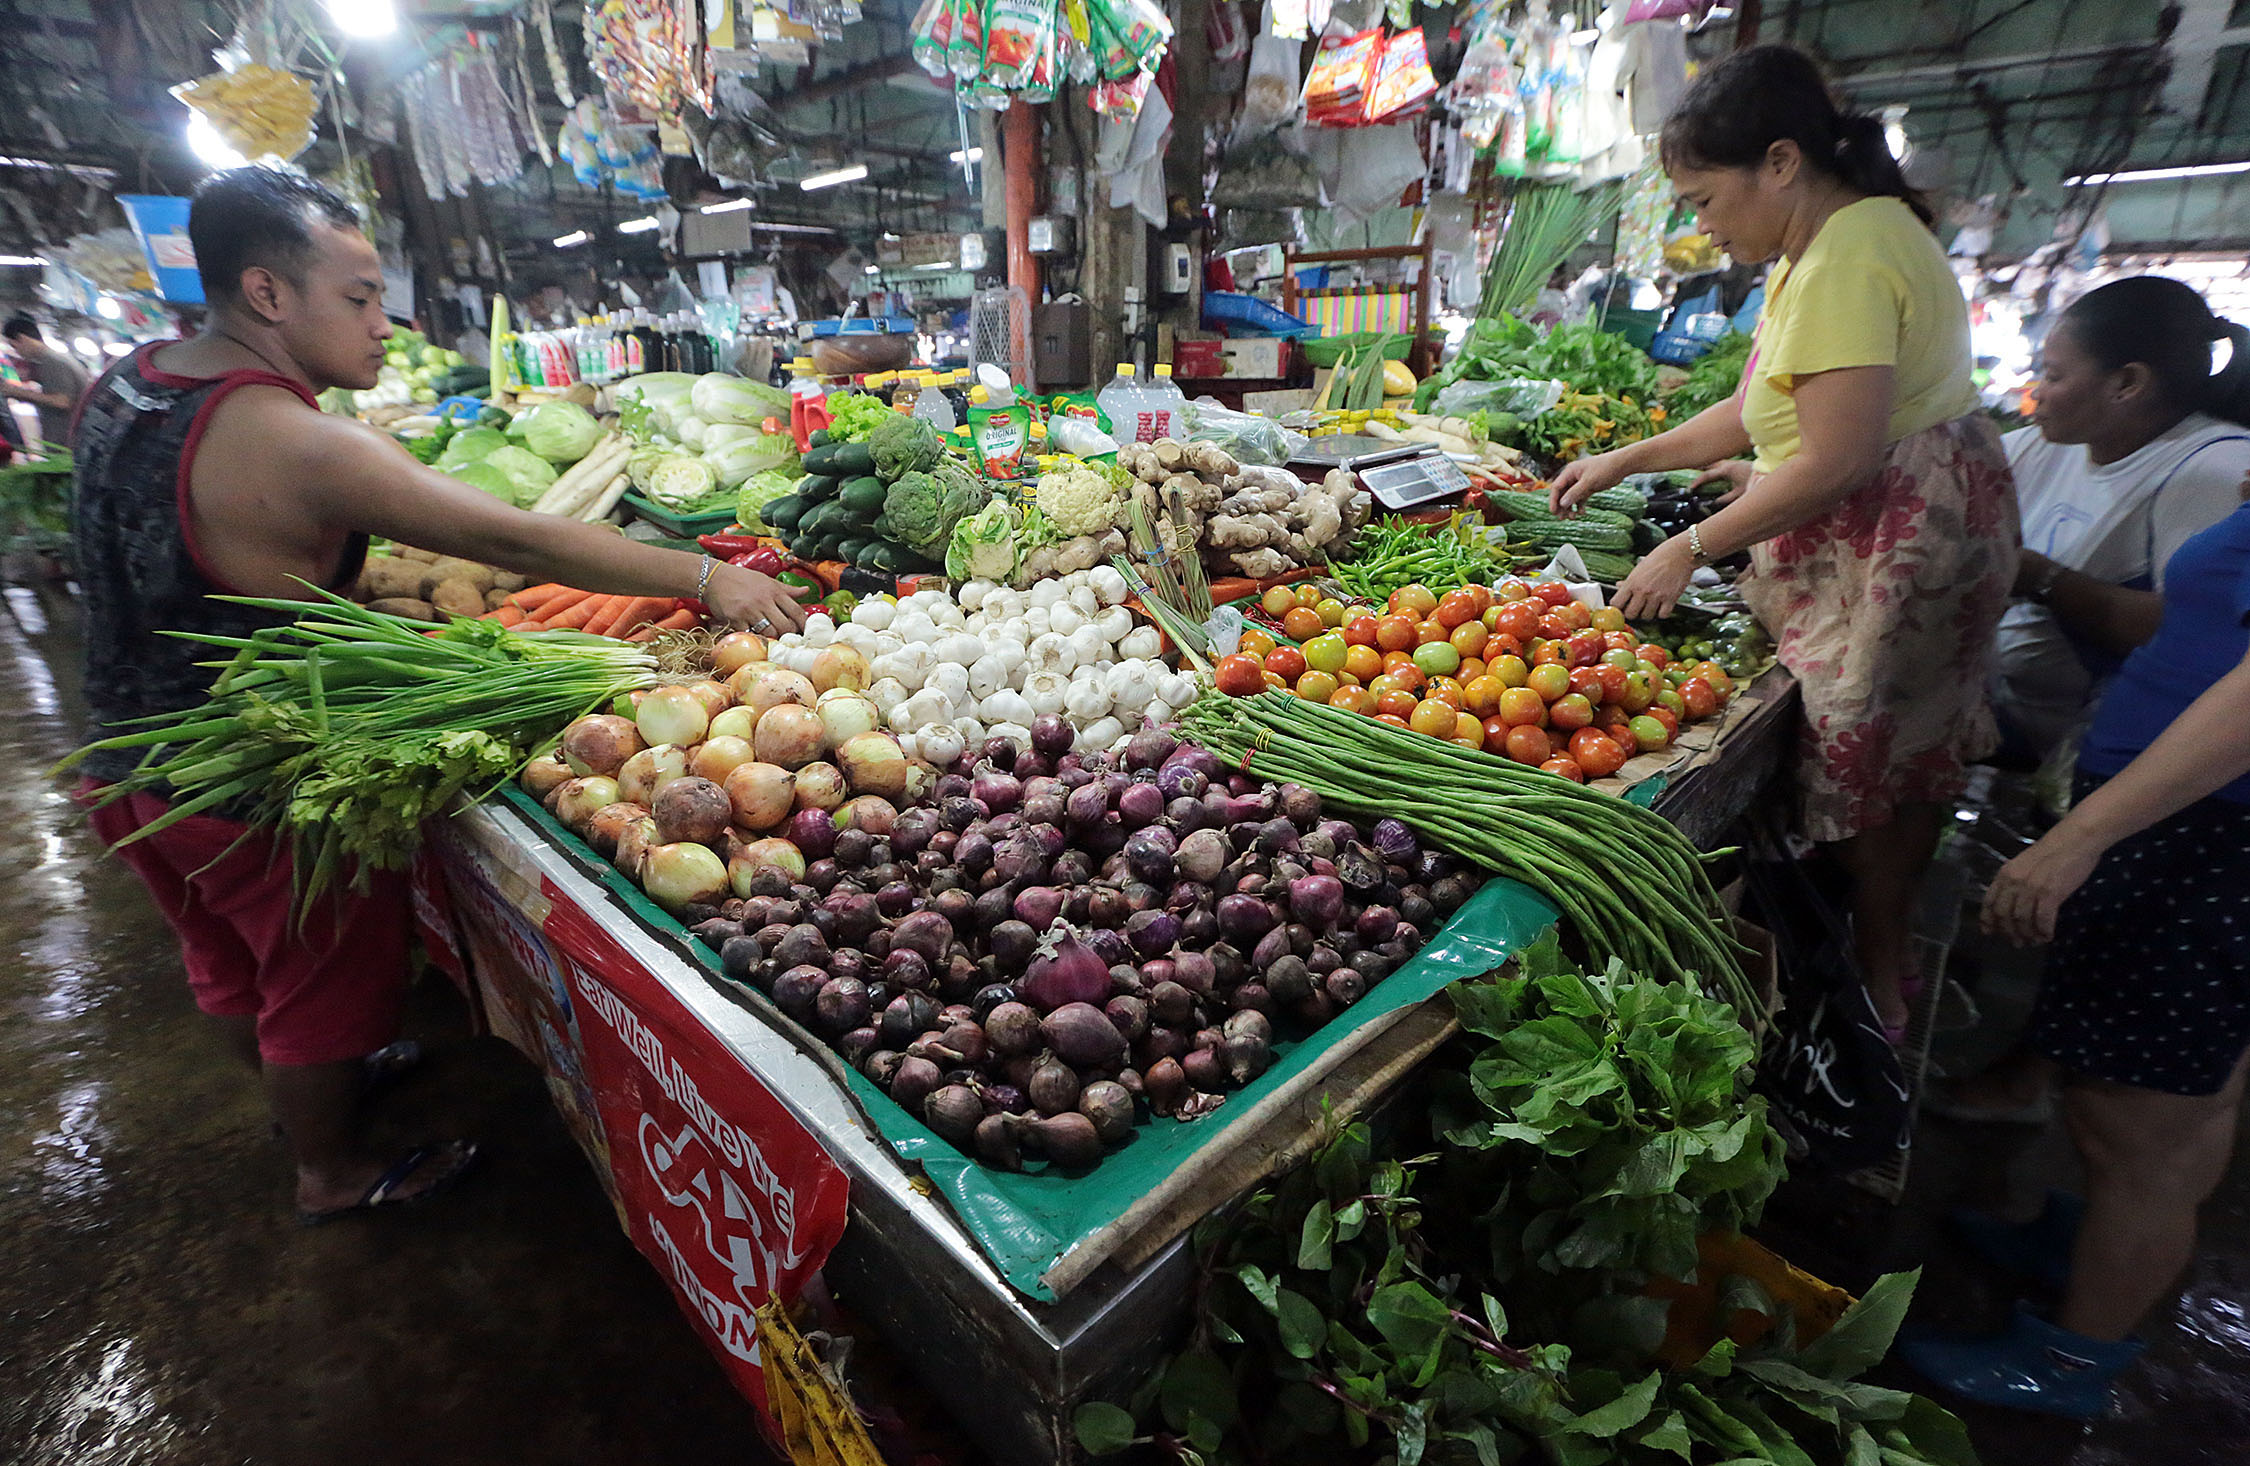 Vegetables and other goods in a market